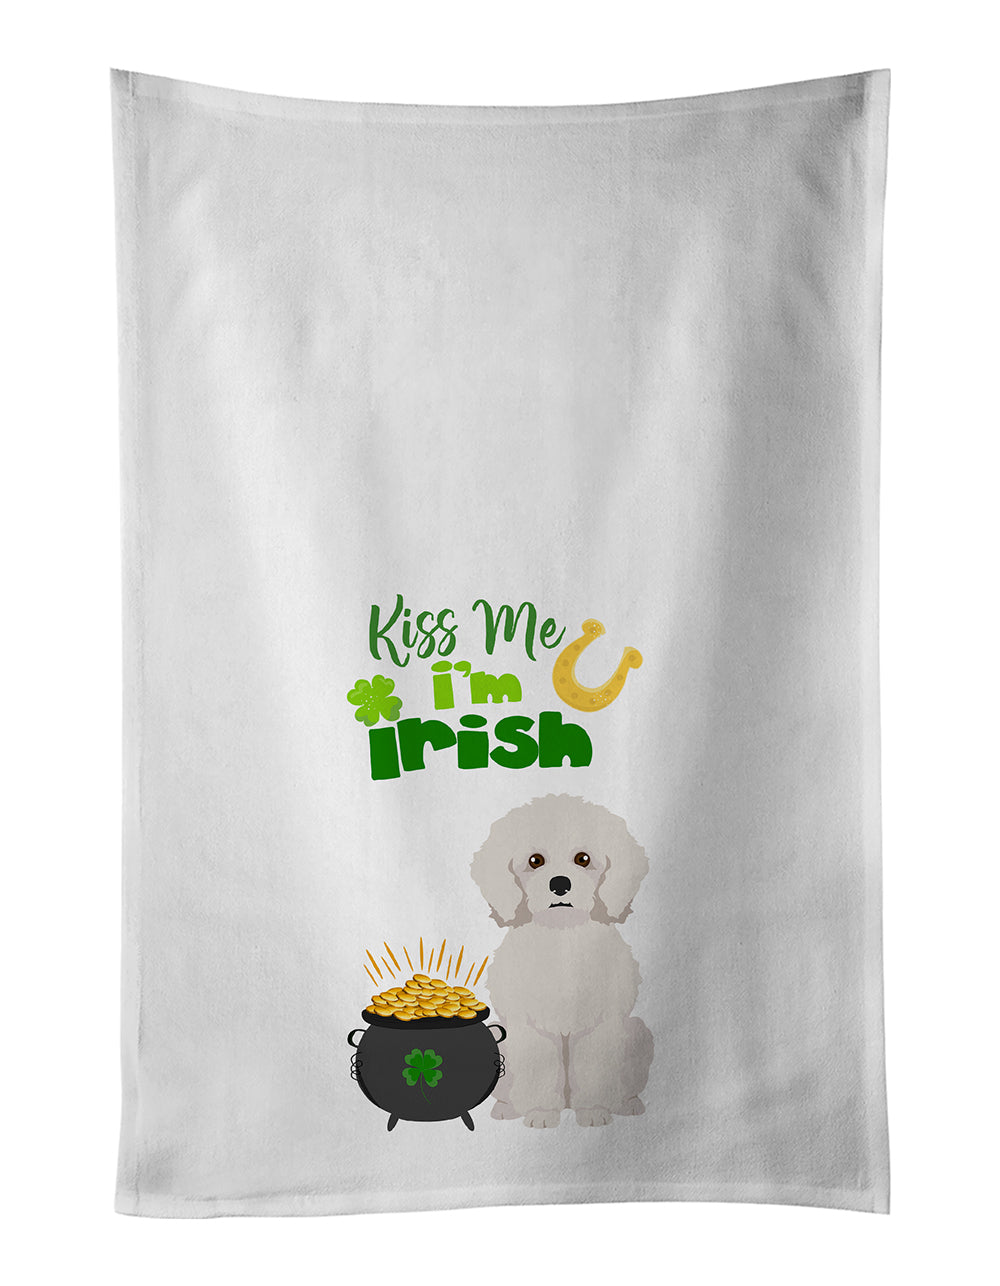 Buy this Bichon Frise St. Patrick's Day White Kitchen Towel Set of 2 Dish Towels